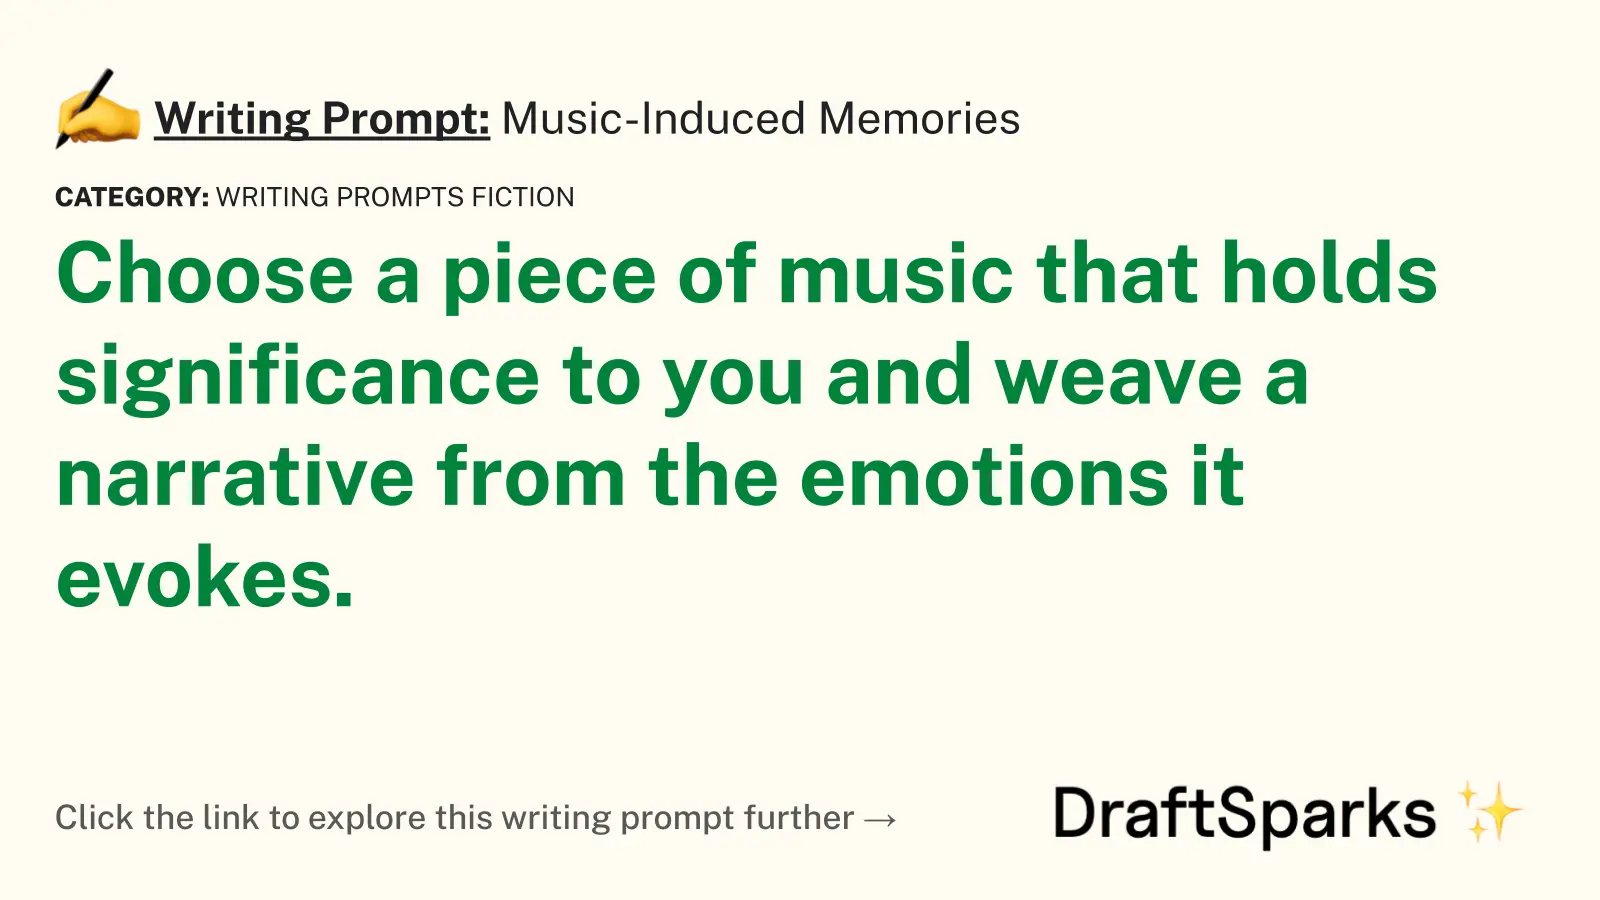 Music-Induced Memories